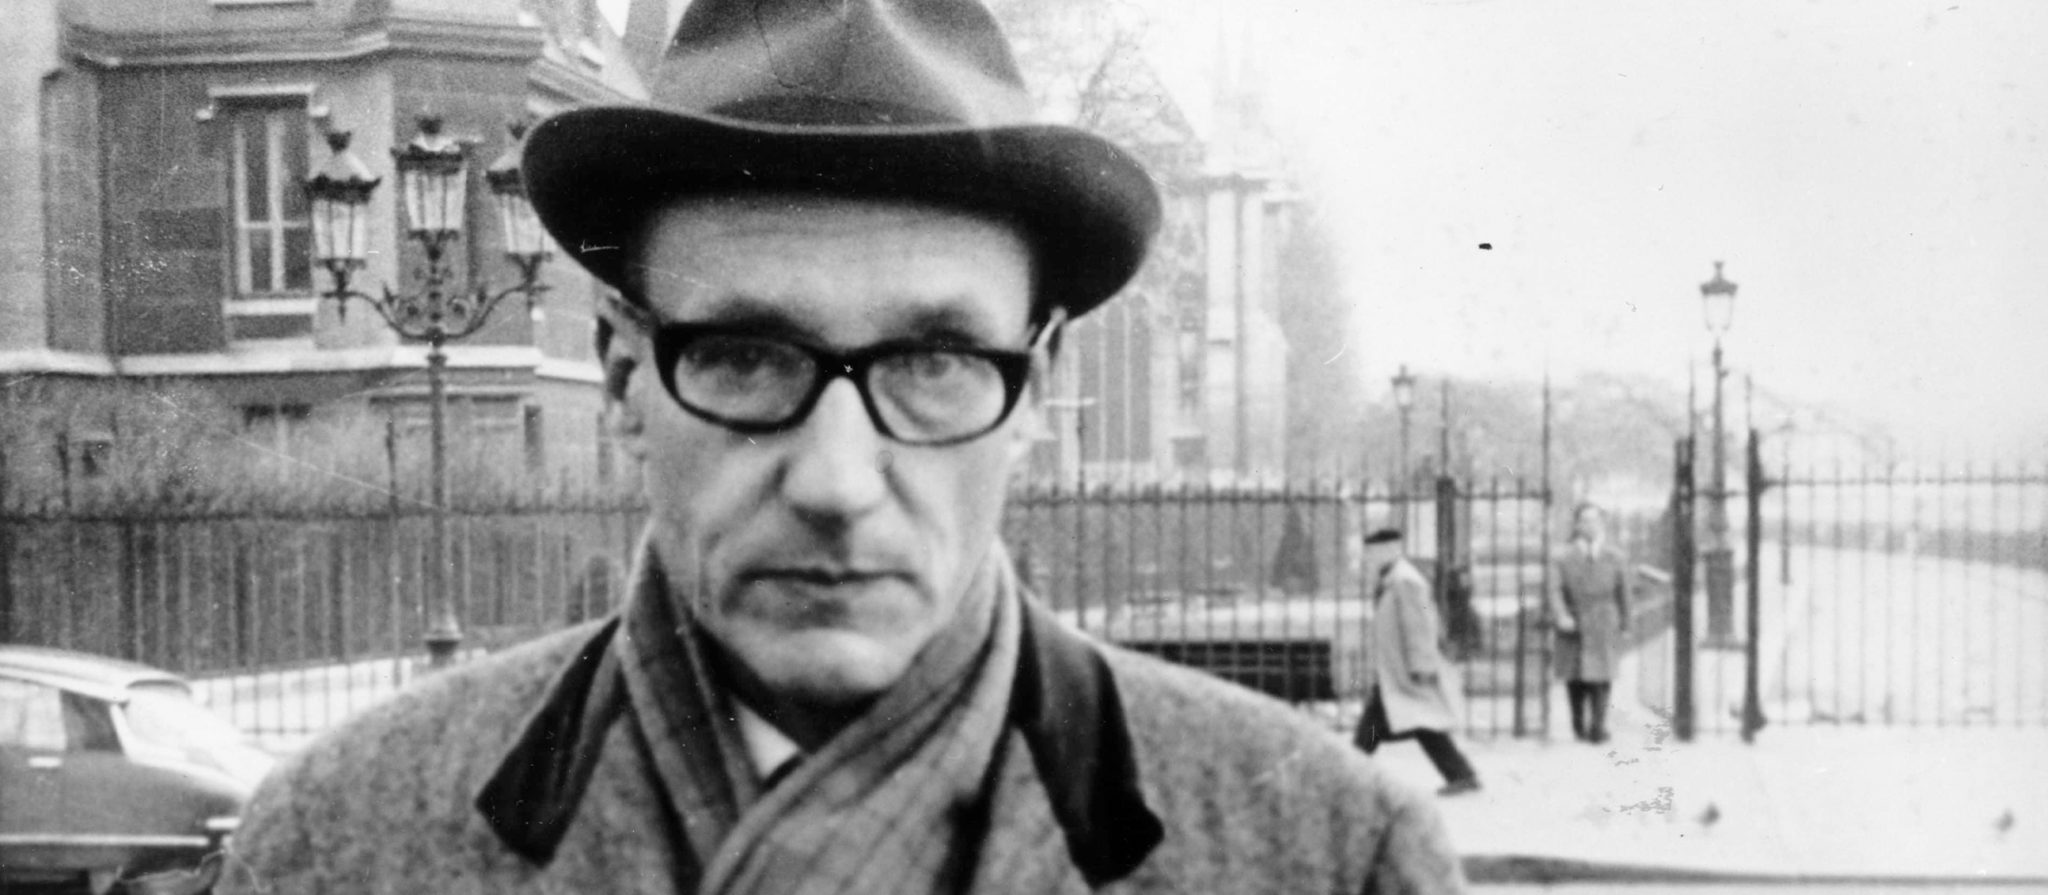 Chaotic Facts About William S. Burroughs, Master Of The Obscene